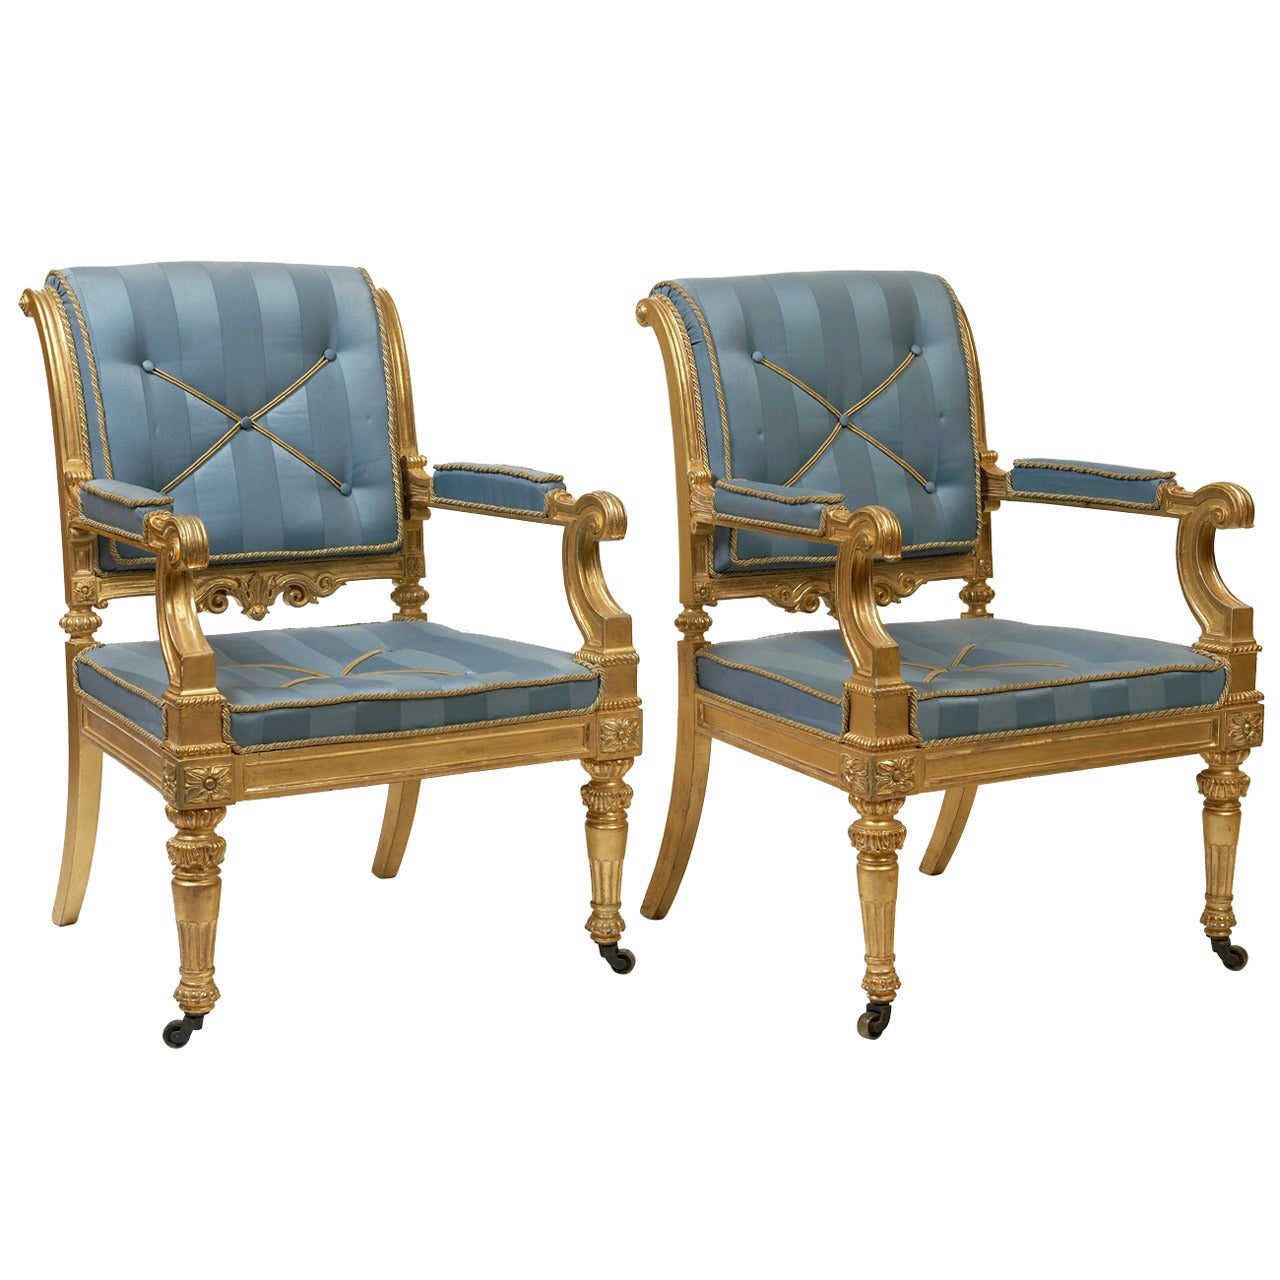 Pair of Carved Giltwood Armchairs, English circa 1830 For Sale